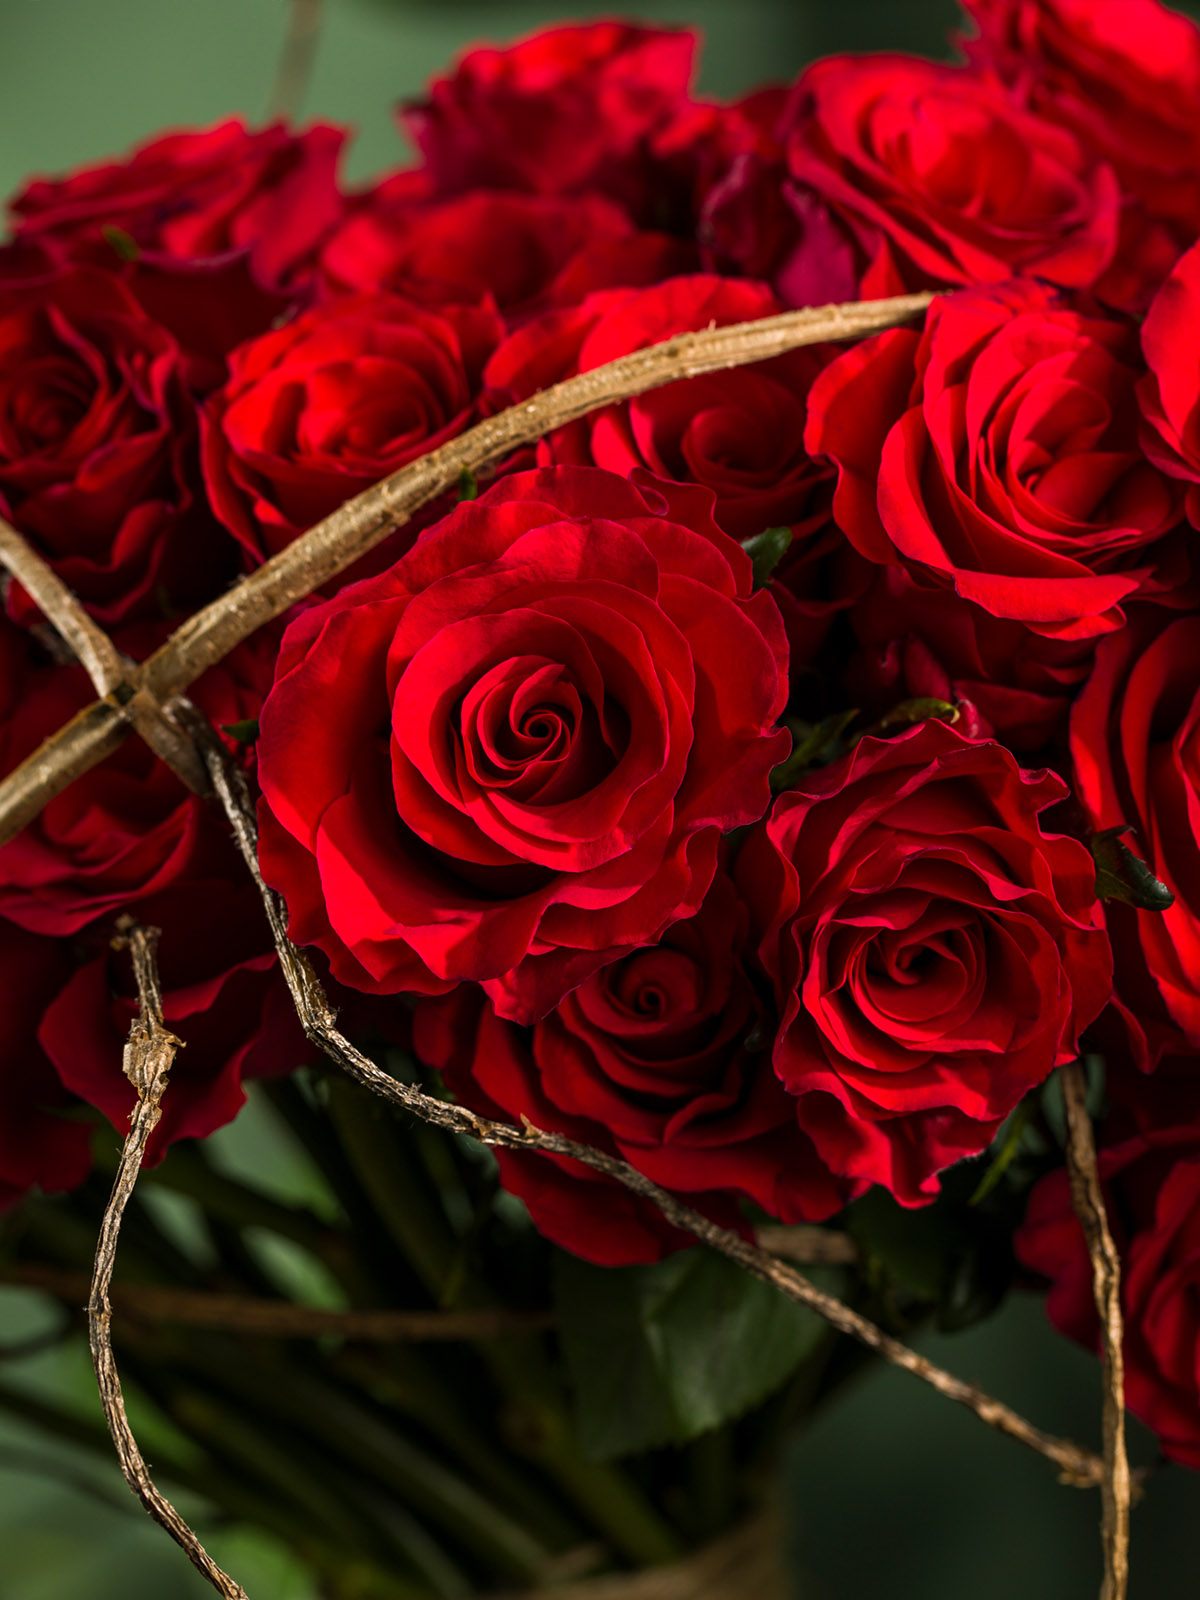 These Are the Most Beautiful Red Roses for Christmas015